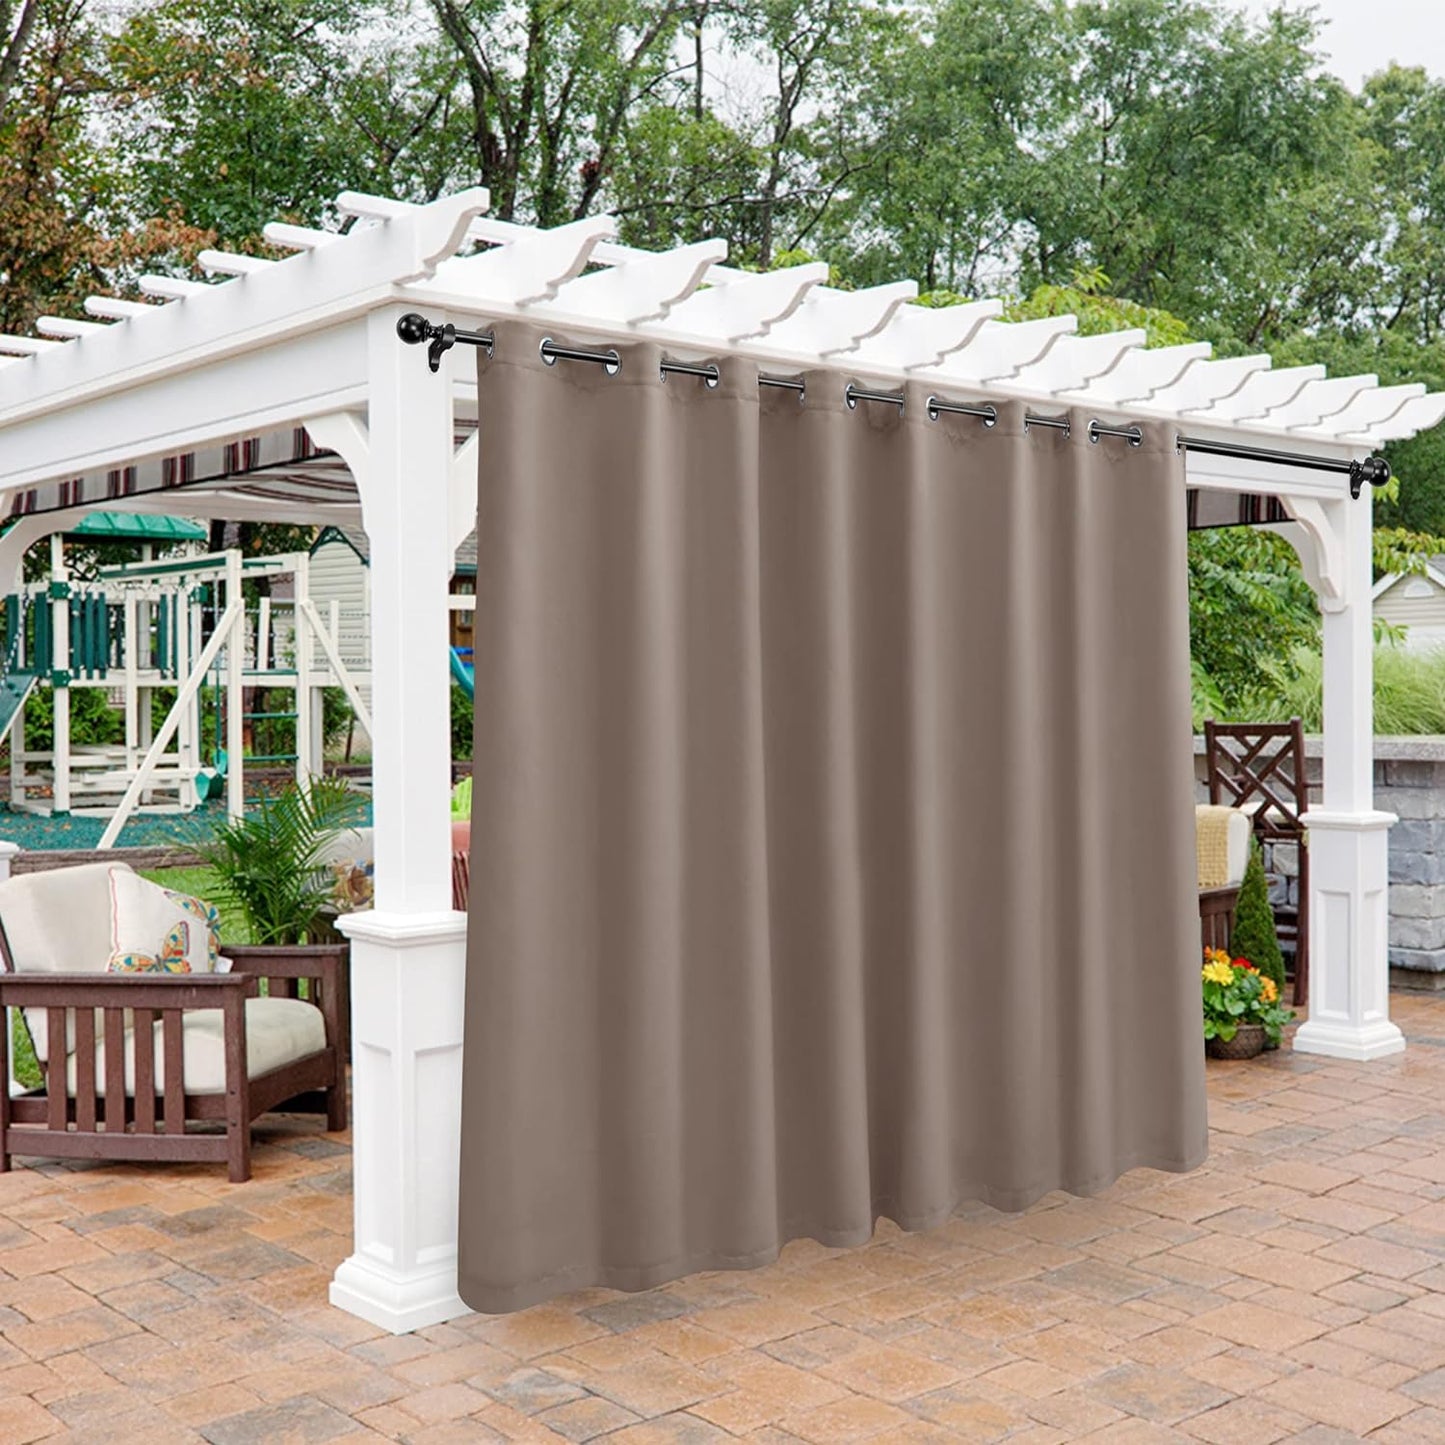 BONZER Outdoor Curtains for Patio Waterproof - Light Blocking Weather Resistant Privacy Grommet Blackout Curtains for Gazebo, Porch, Pergola, Cabana, Deck, Sunroom, 1 Panel, 52W X 84L Inch, Silver  BONZER Khaki 120W X 95 Inch 